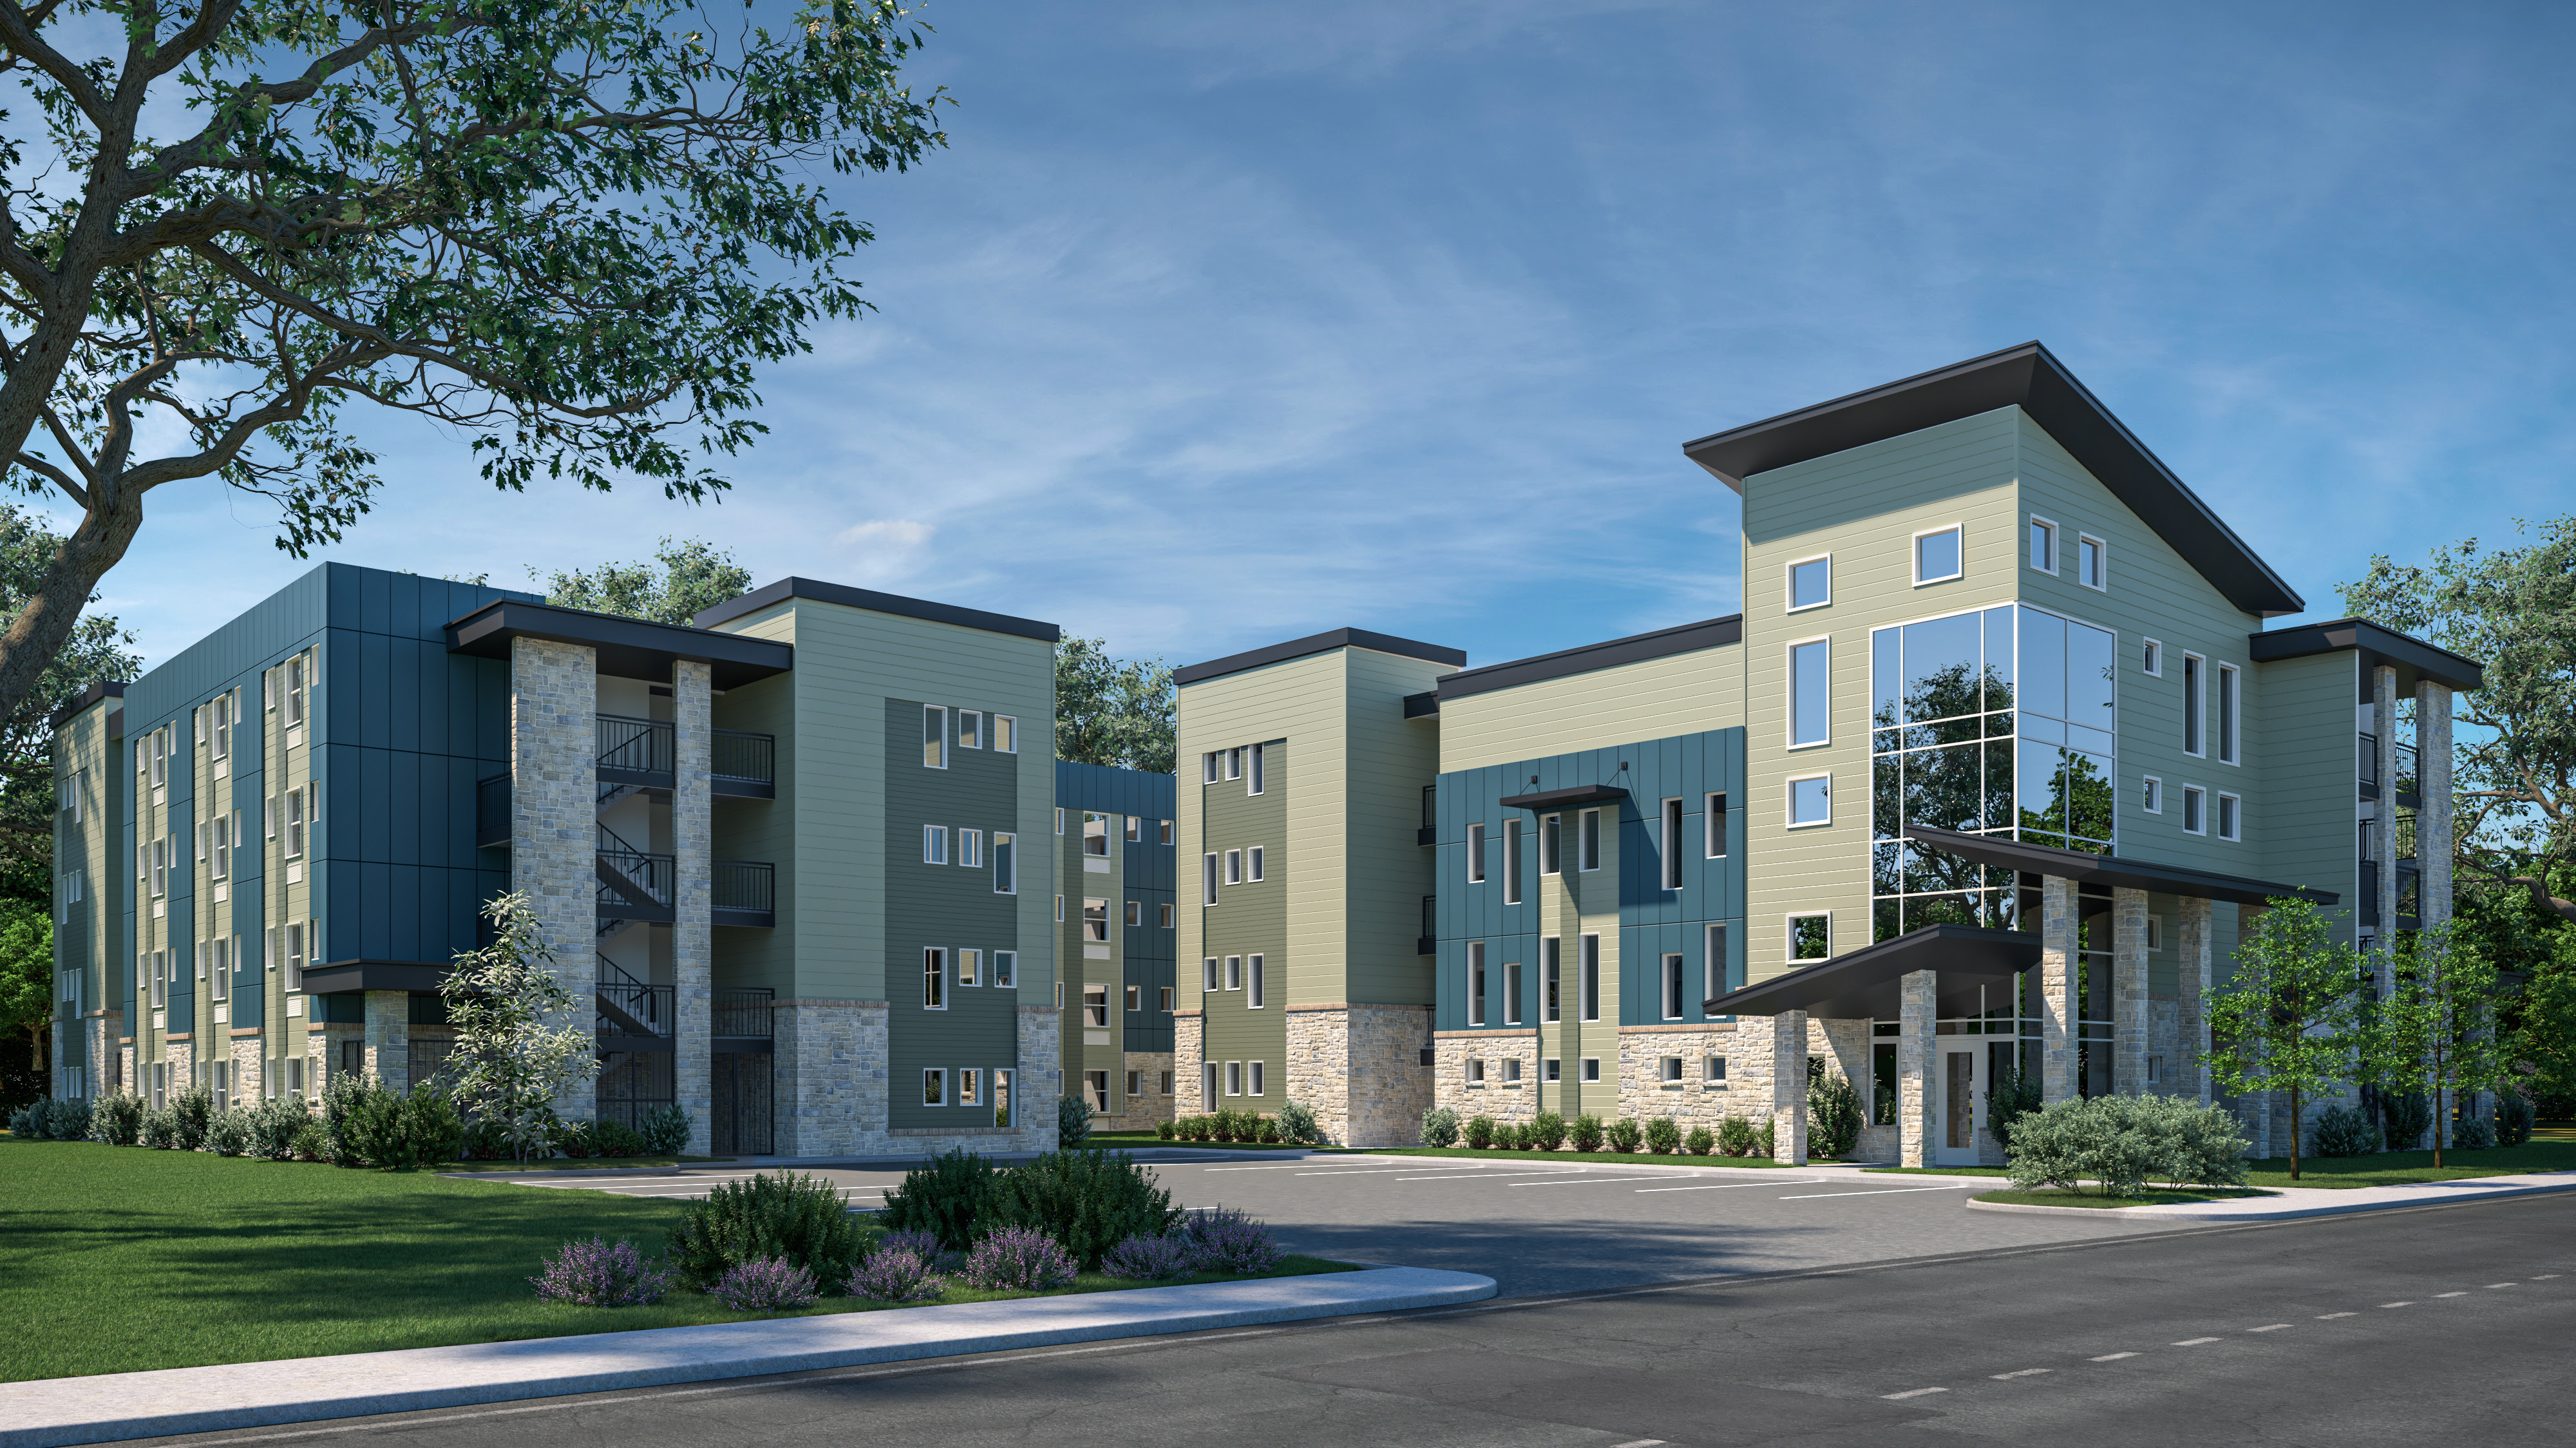 Rendering of Cady Lofts property - which is similar in layout and design to The Roz multi-family development. 